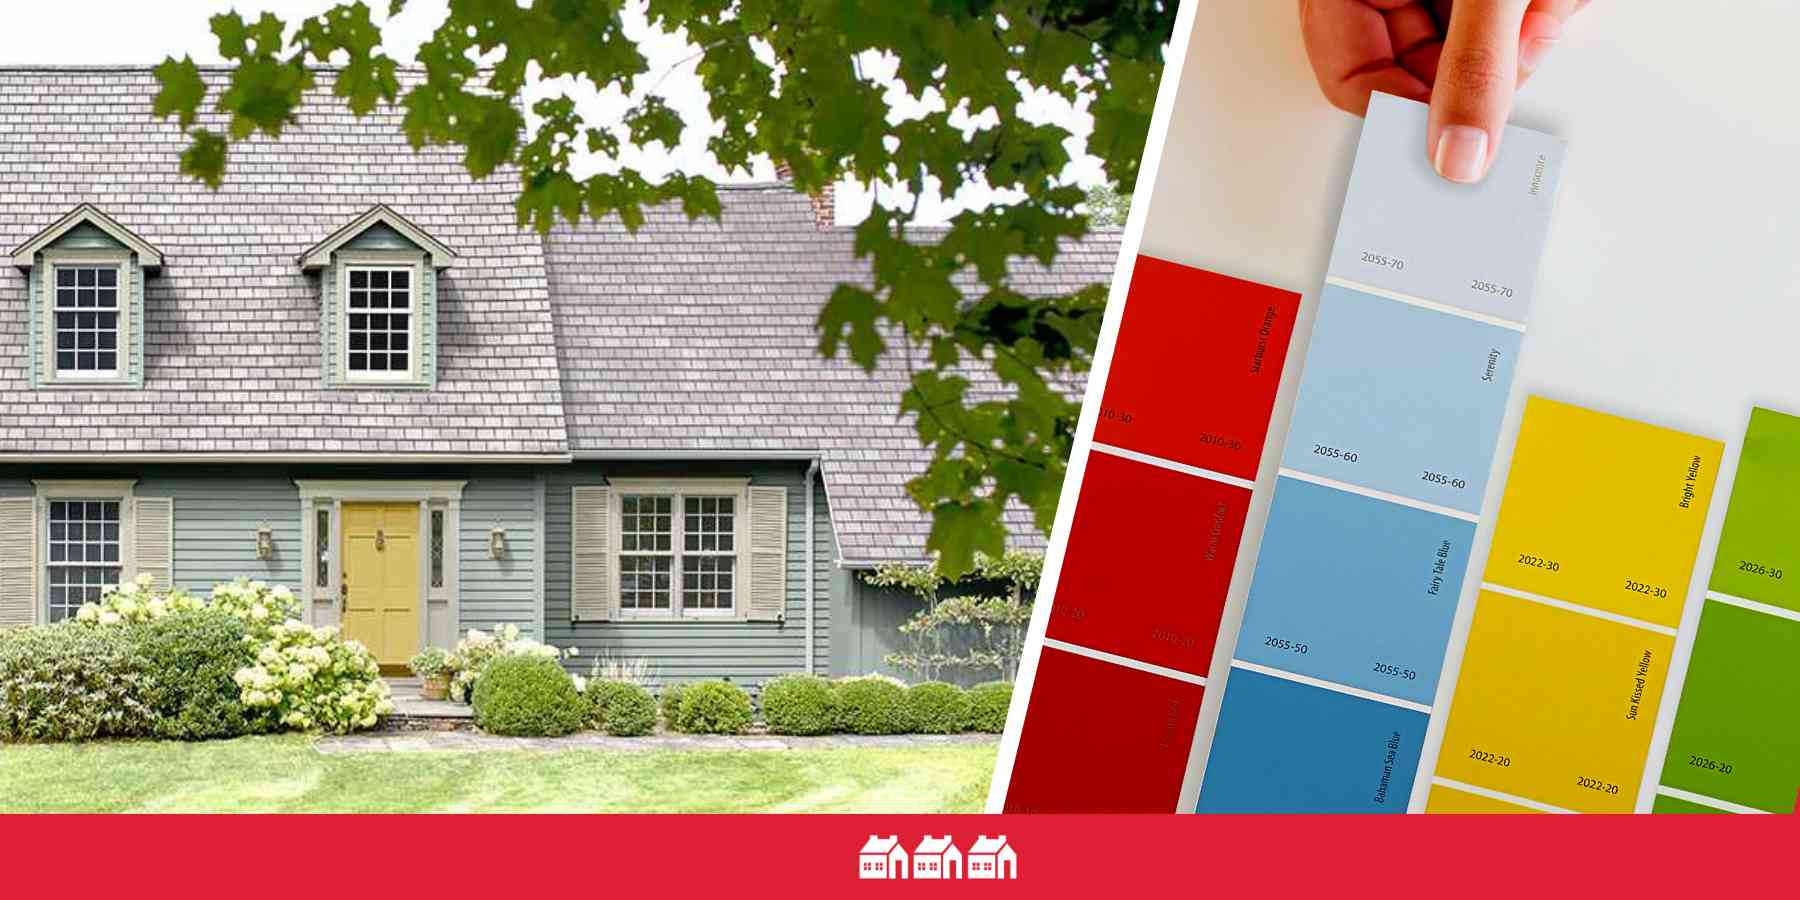 Refresh your home this spring with a new coat of Benjamin Moore paint from your local Benjamin Moore: Johnson Paint (A Rings End Brand)